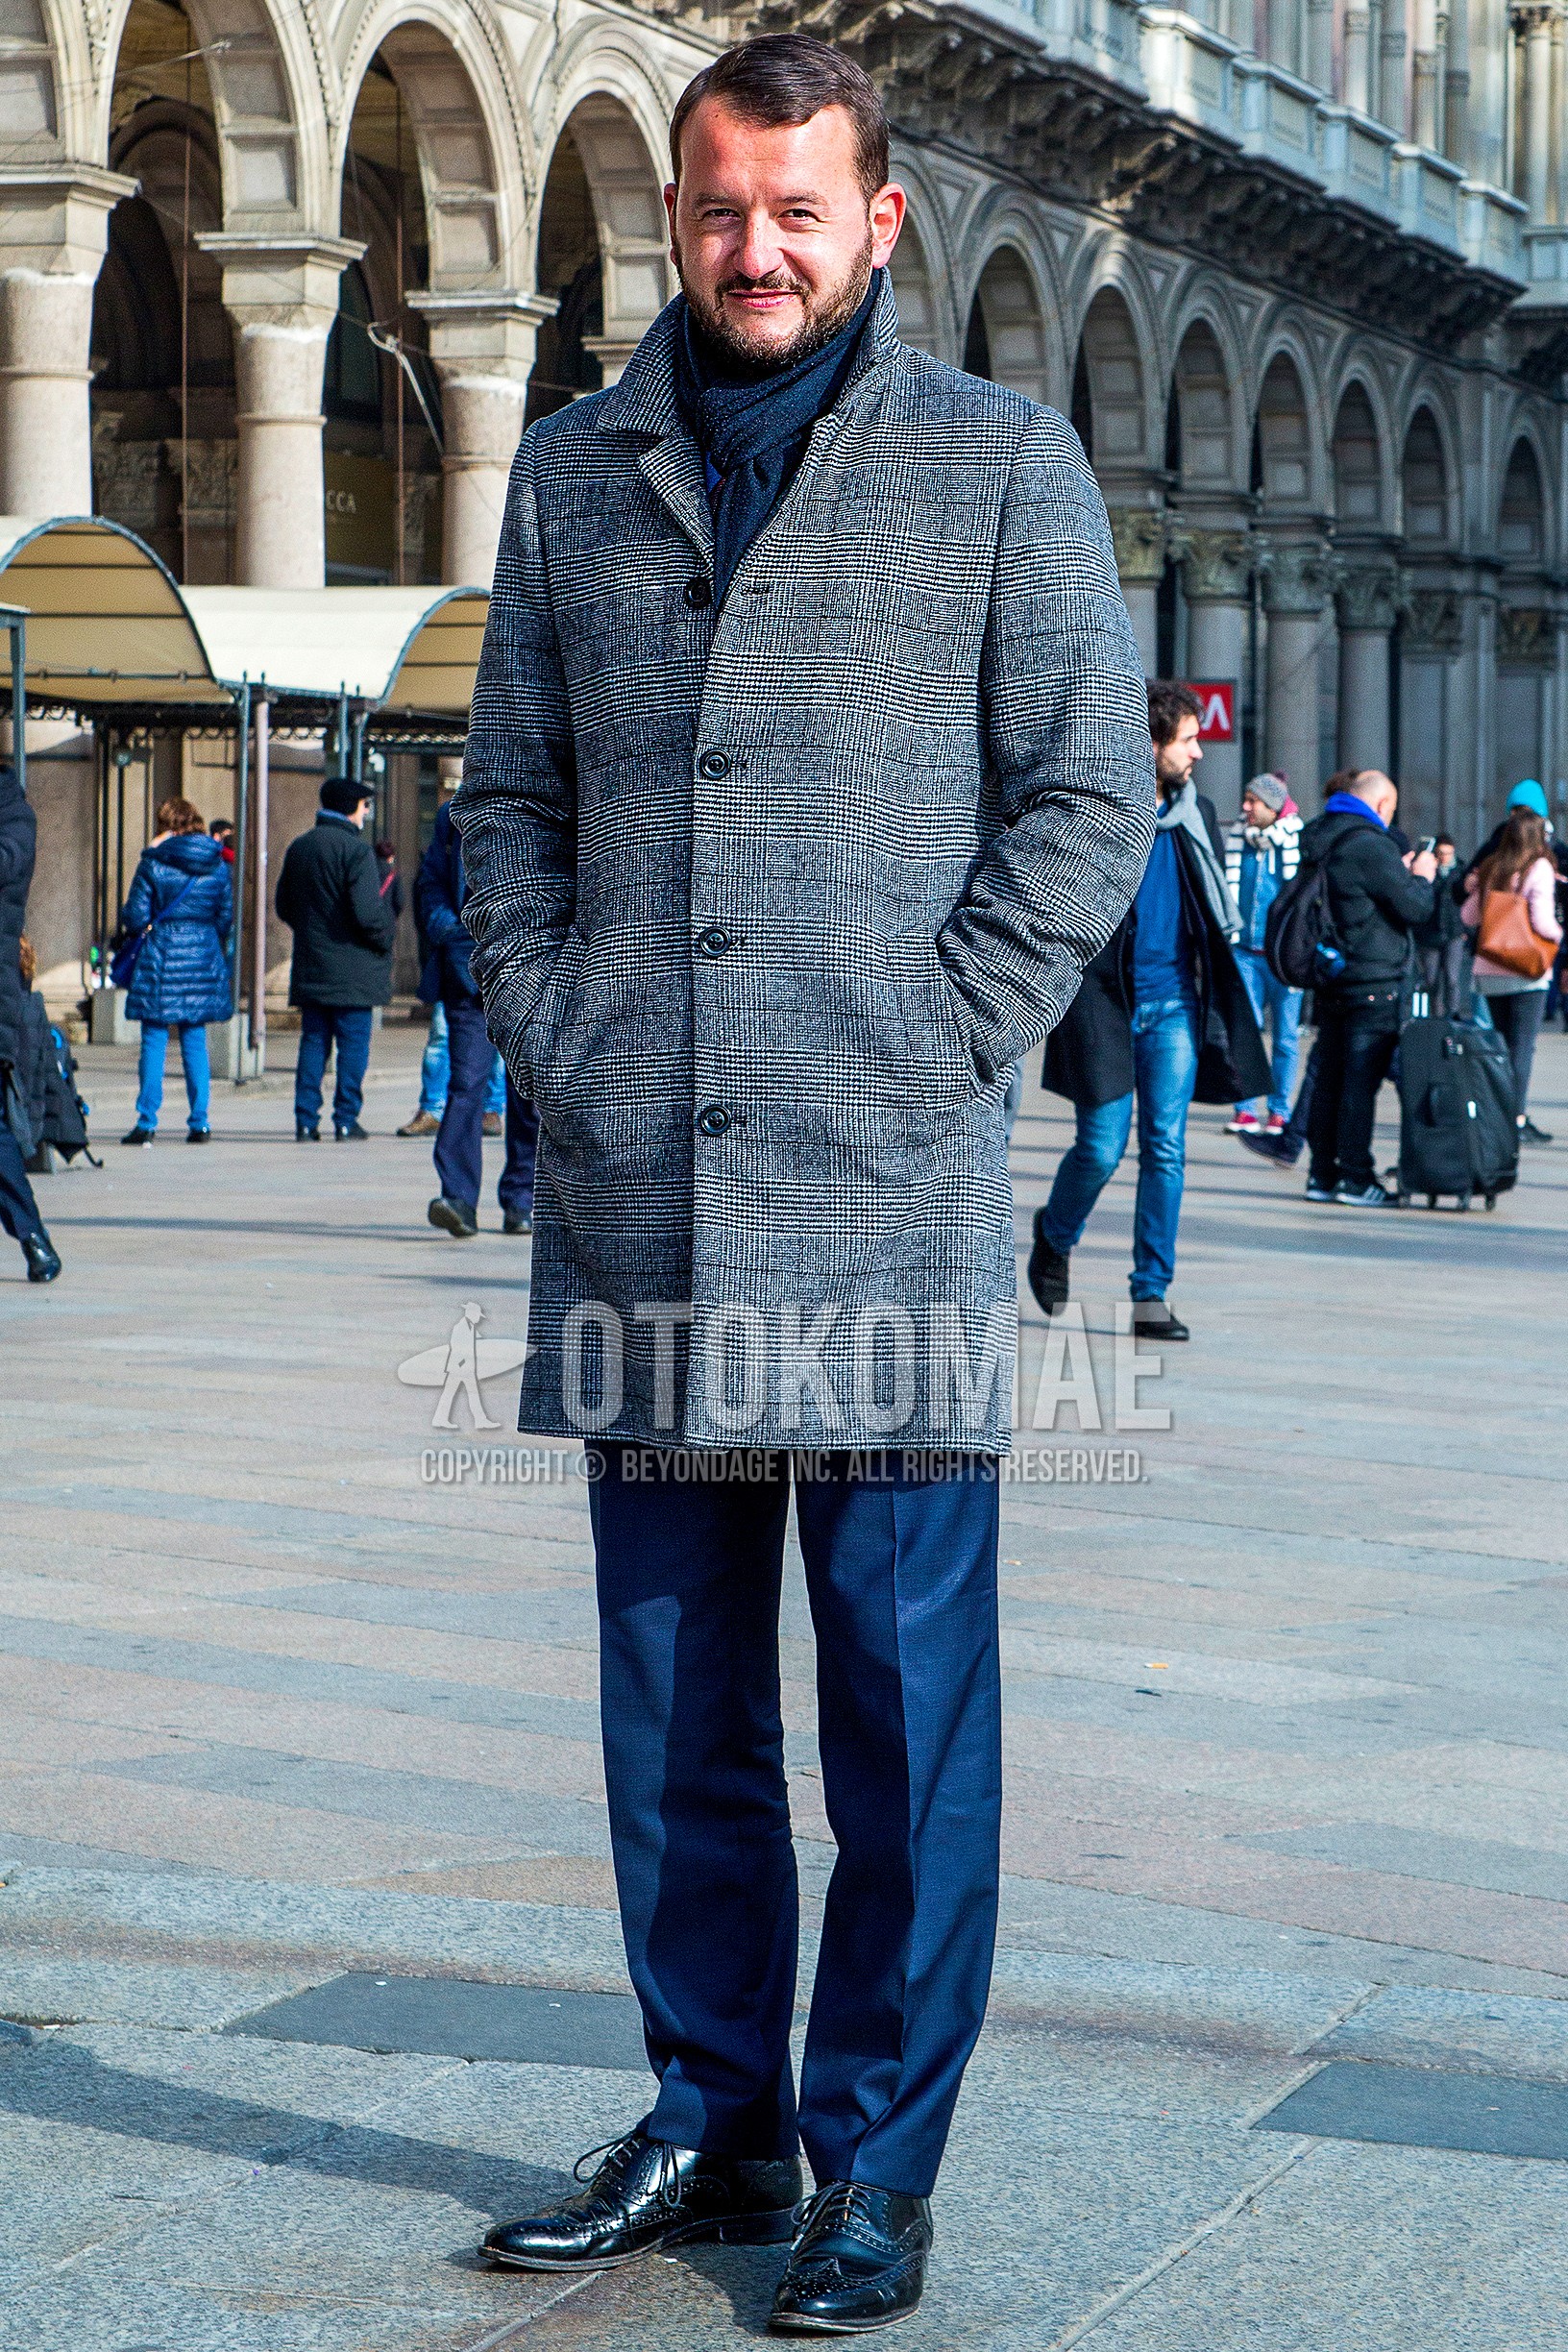 Men's autumn winter outfit with navy plain scarf, gray check stenkarrer coat, navy plain slacks, black wing-tip shoes leather shoes.